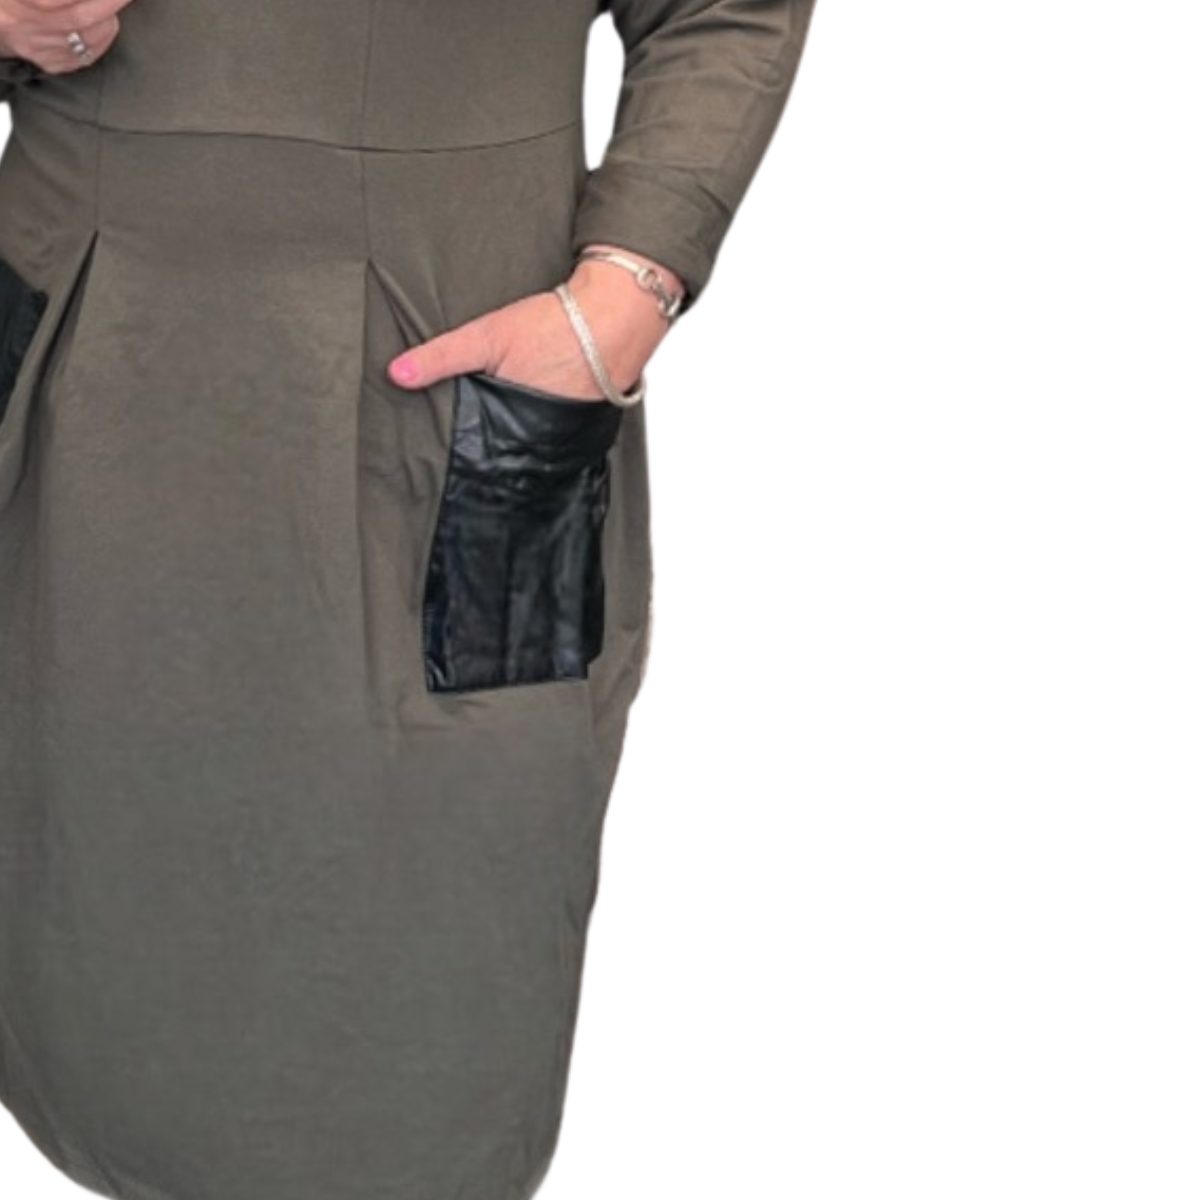 LONG SLEEVE DRESS WITH FAUX LEATHER POCKETS